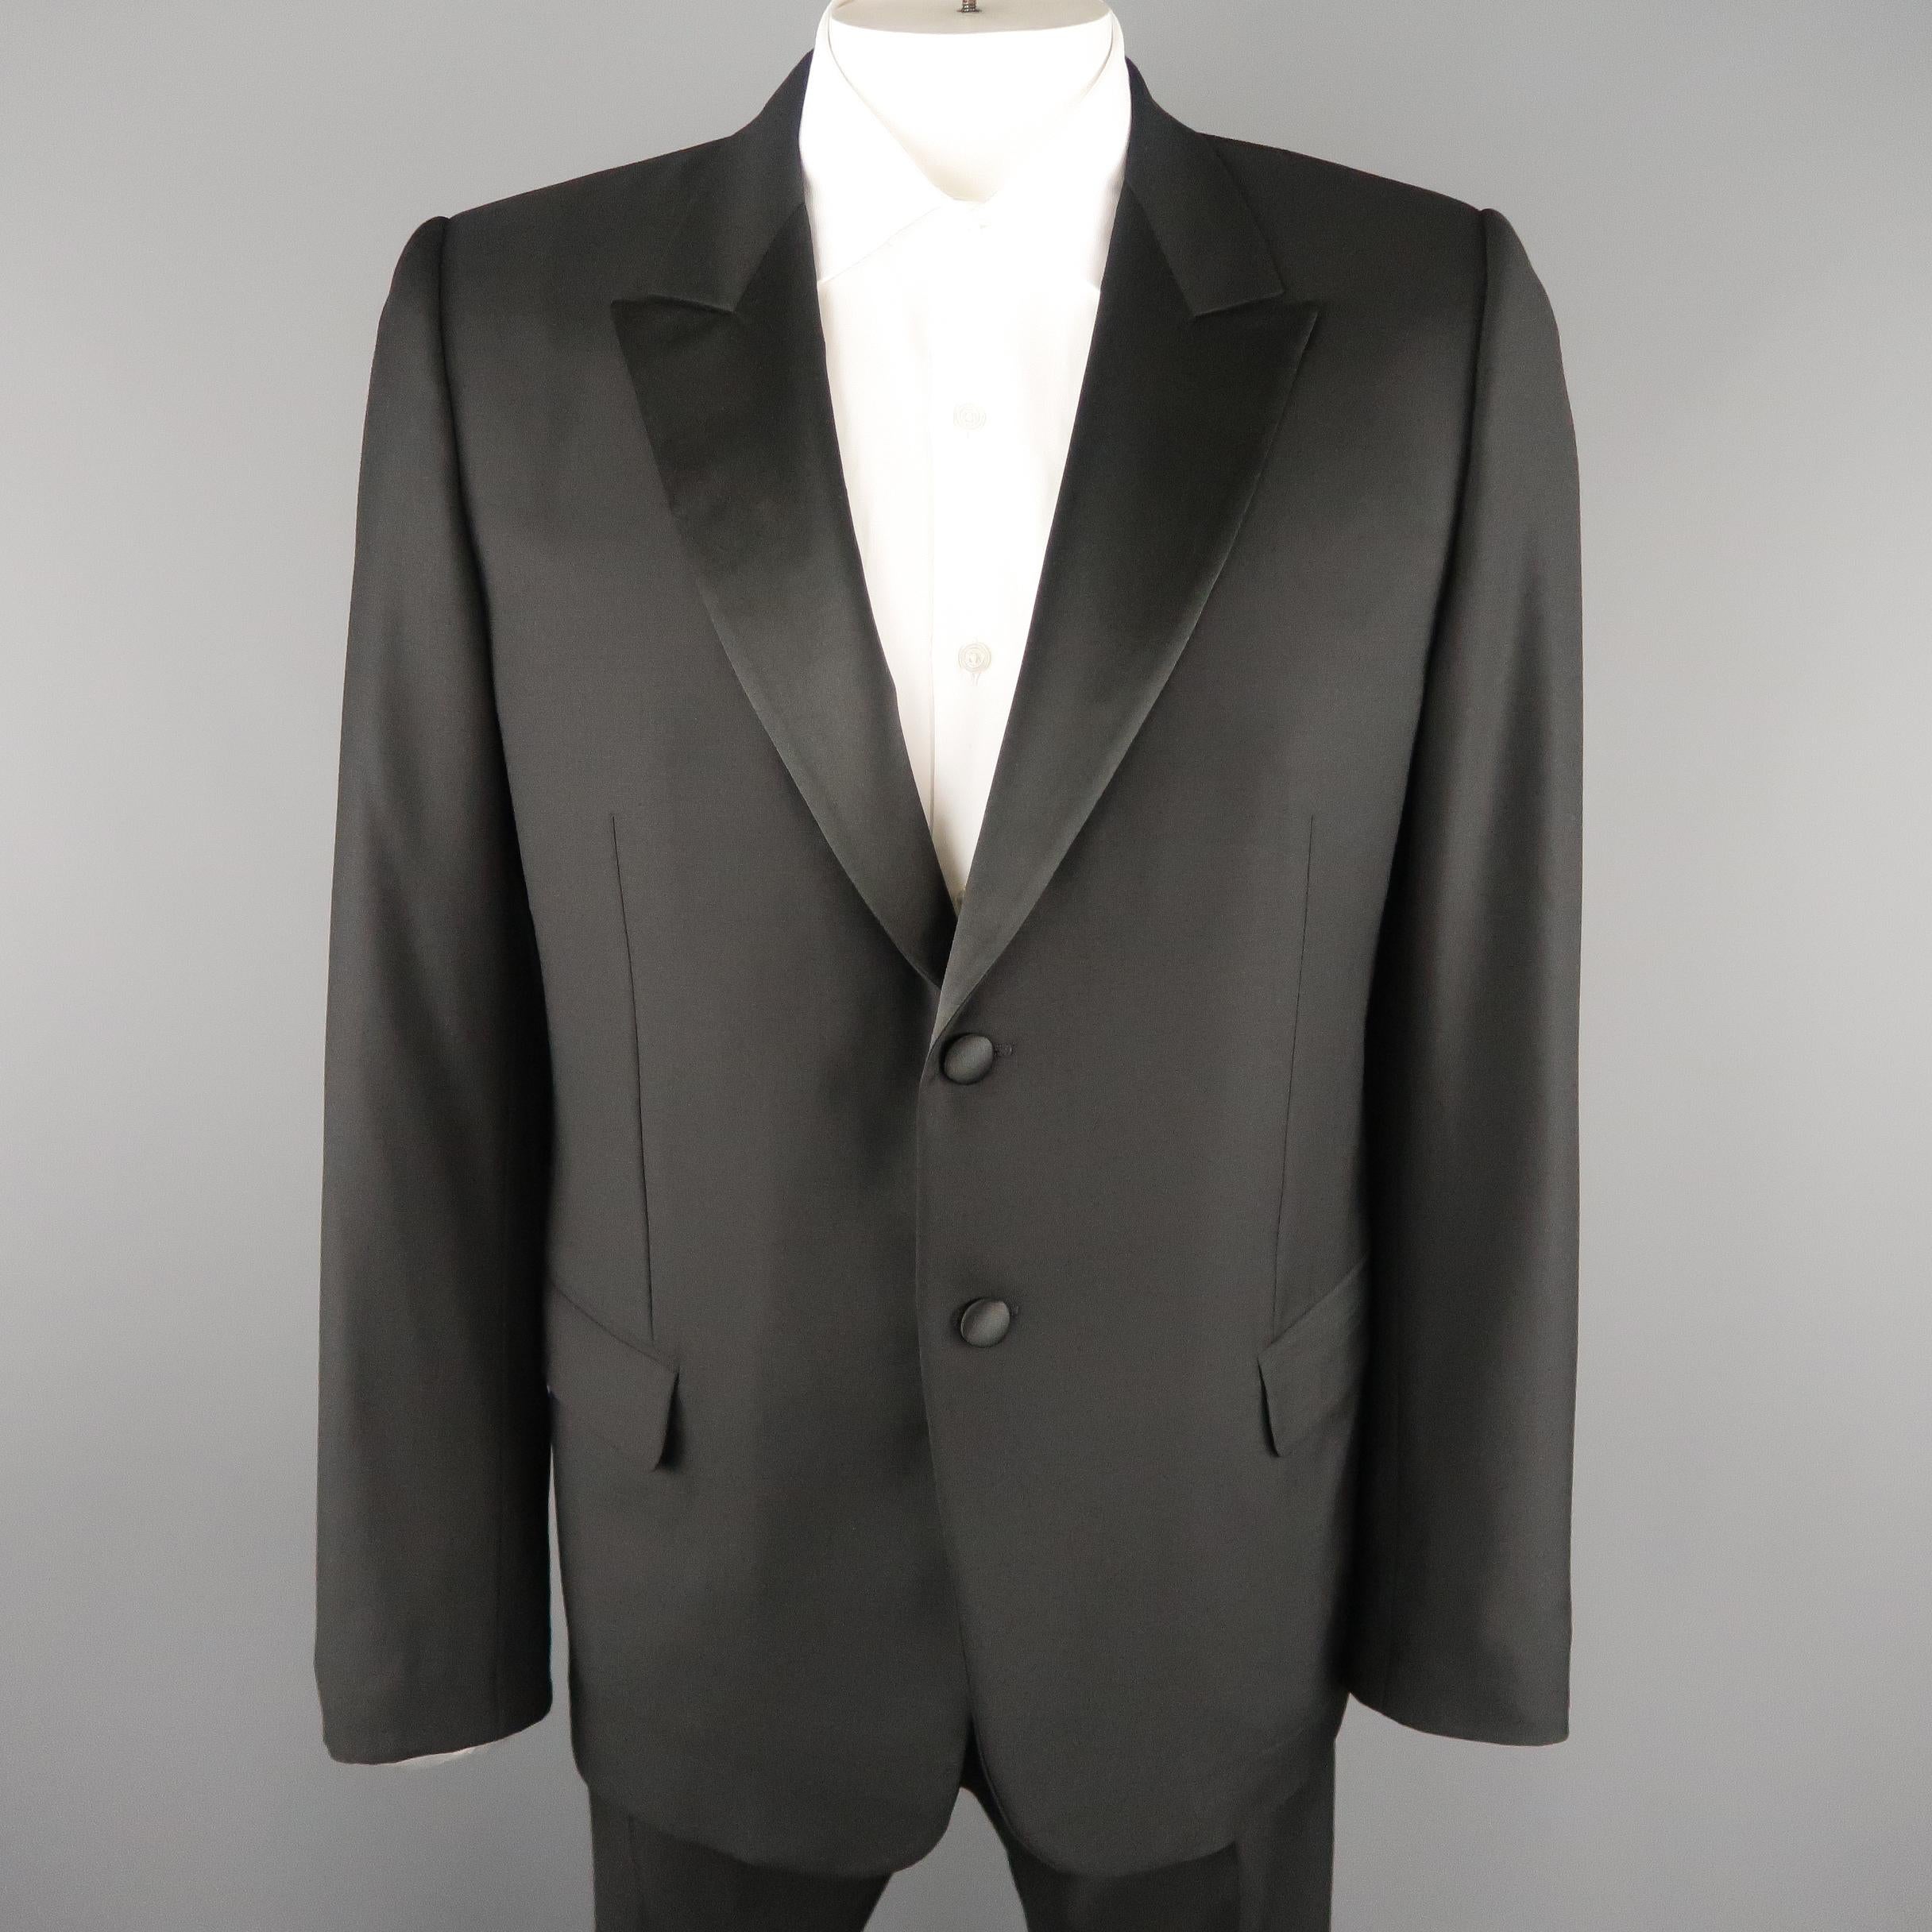 ALEXANDER MCQUEEN tuxedo comes in black wool and includes a single breasted sport coat with satin peak lapel,and two button front with matching flat front trouser with satin stripe. Made in Italy.
 
Excellent Pre-Owned Condition.
Marked: IT 54
